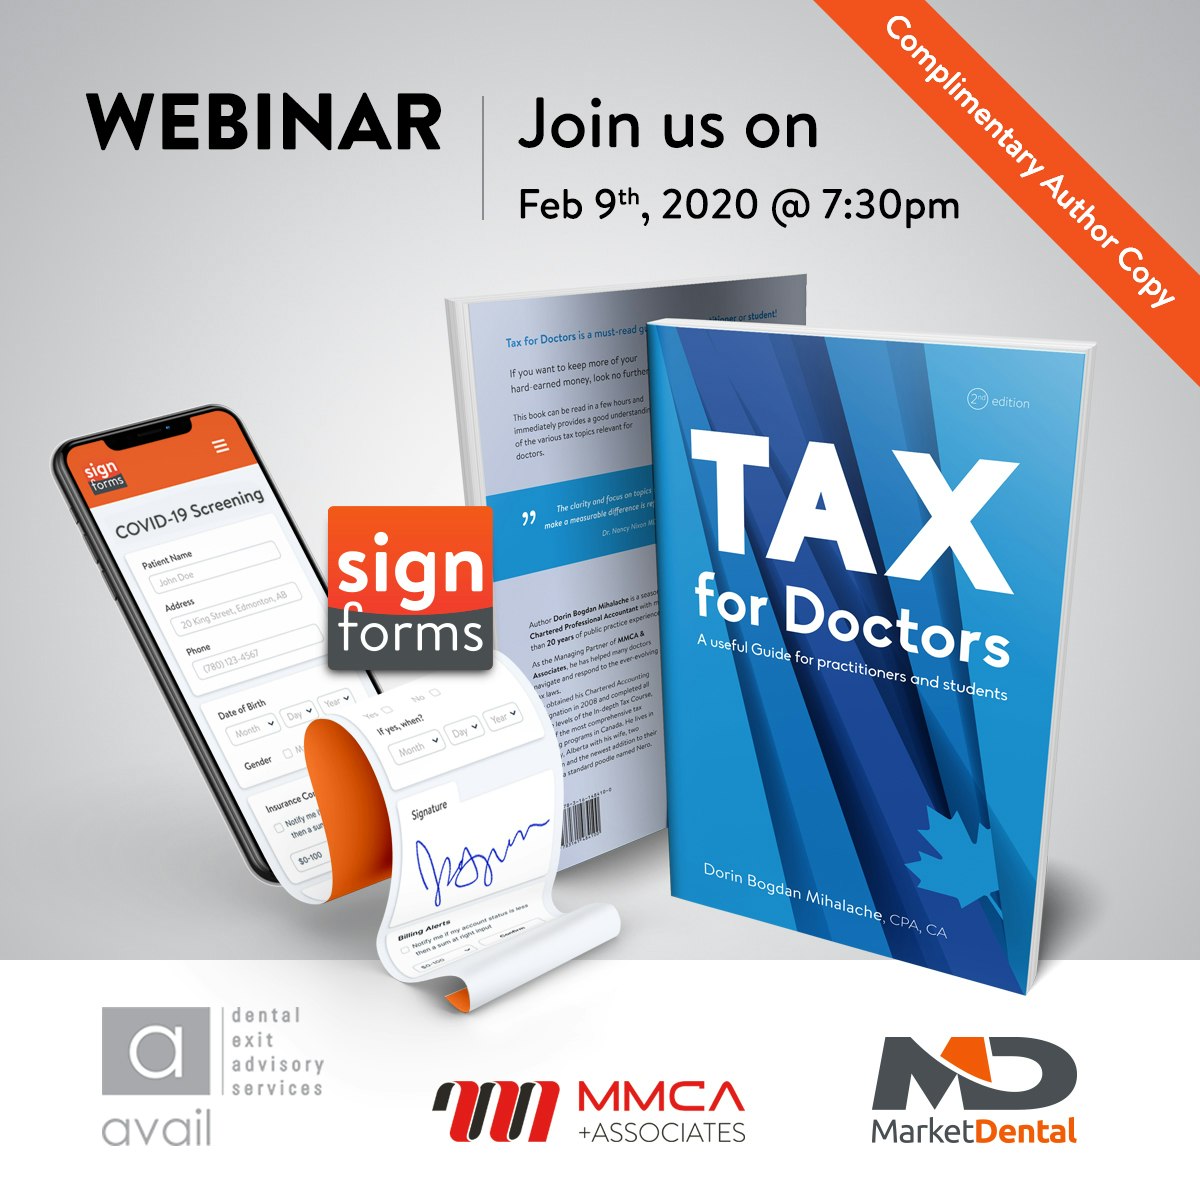 New book releases Tax for Doctors & SignForms (COVID forms). Free Webinar on Feb 9th, 2020 at 7:30pm (Mountain Time)